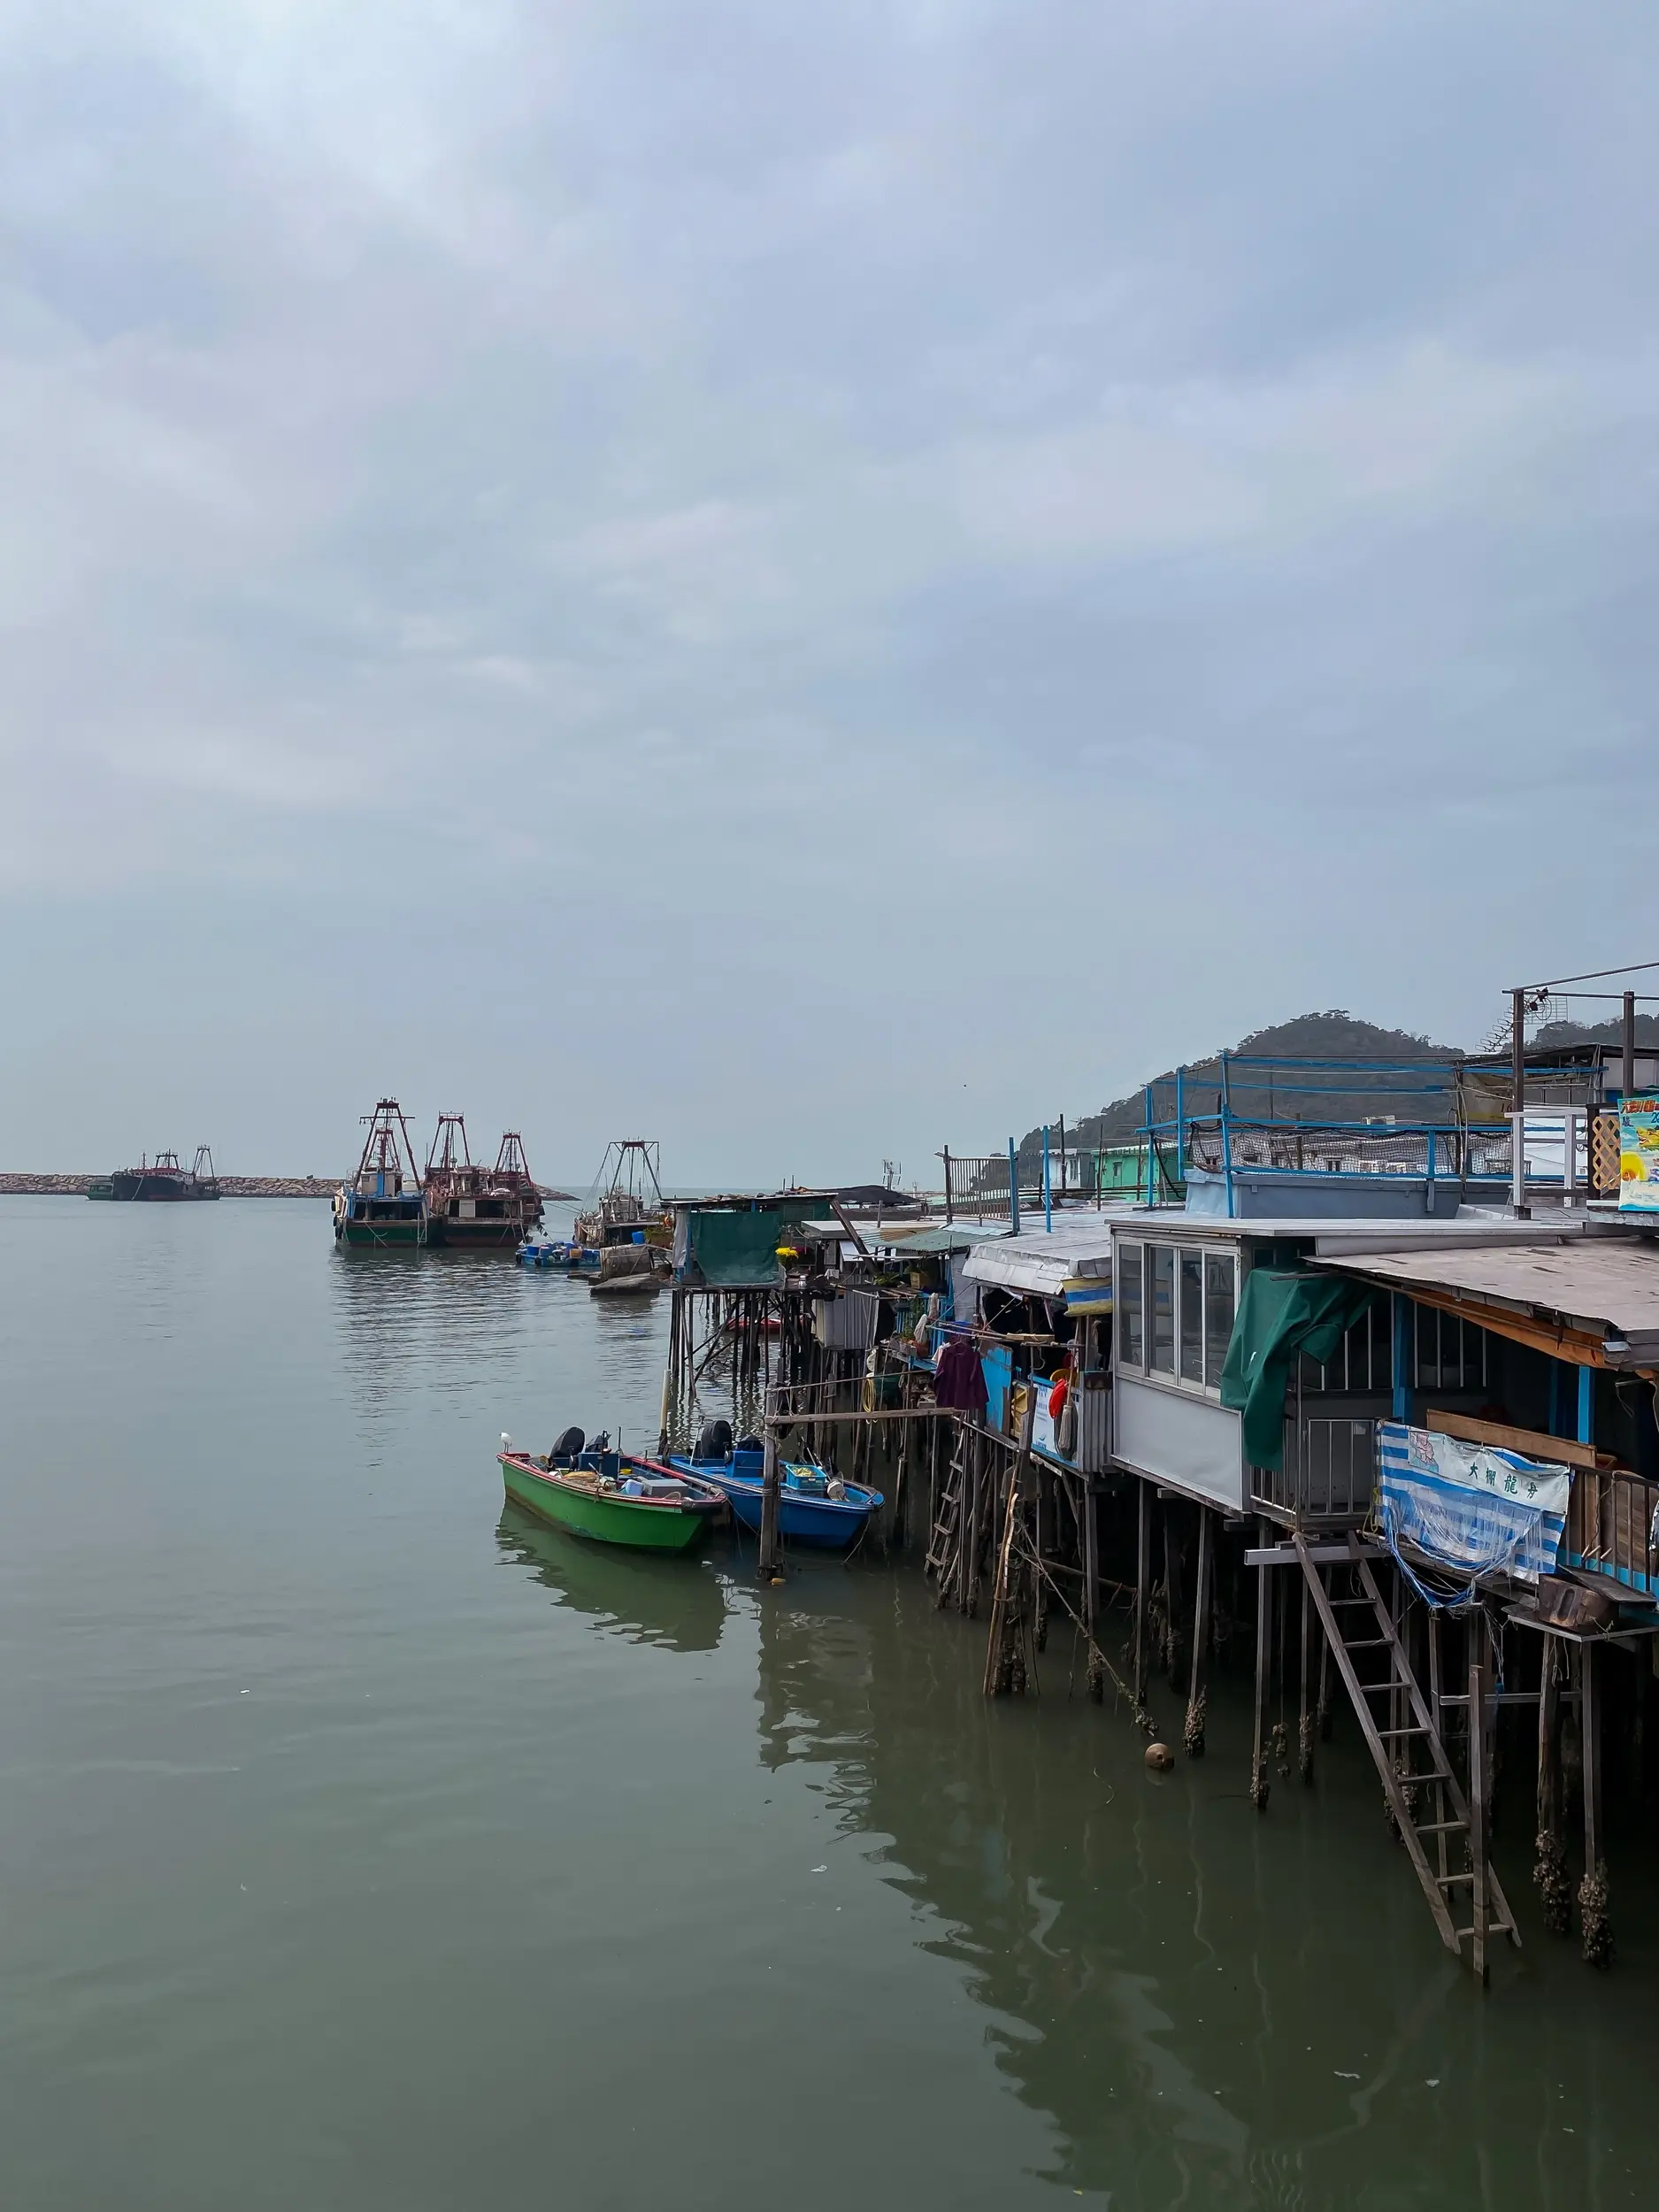 Quaint and picturesque Tai O Fishing Village